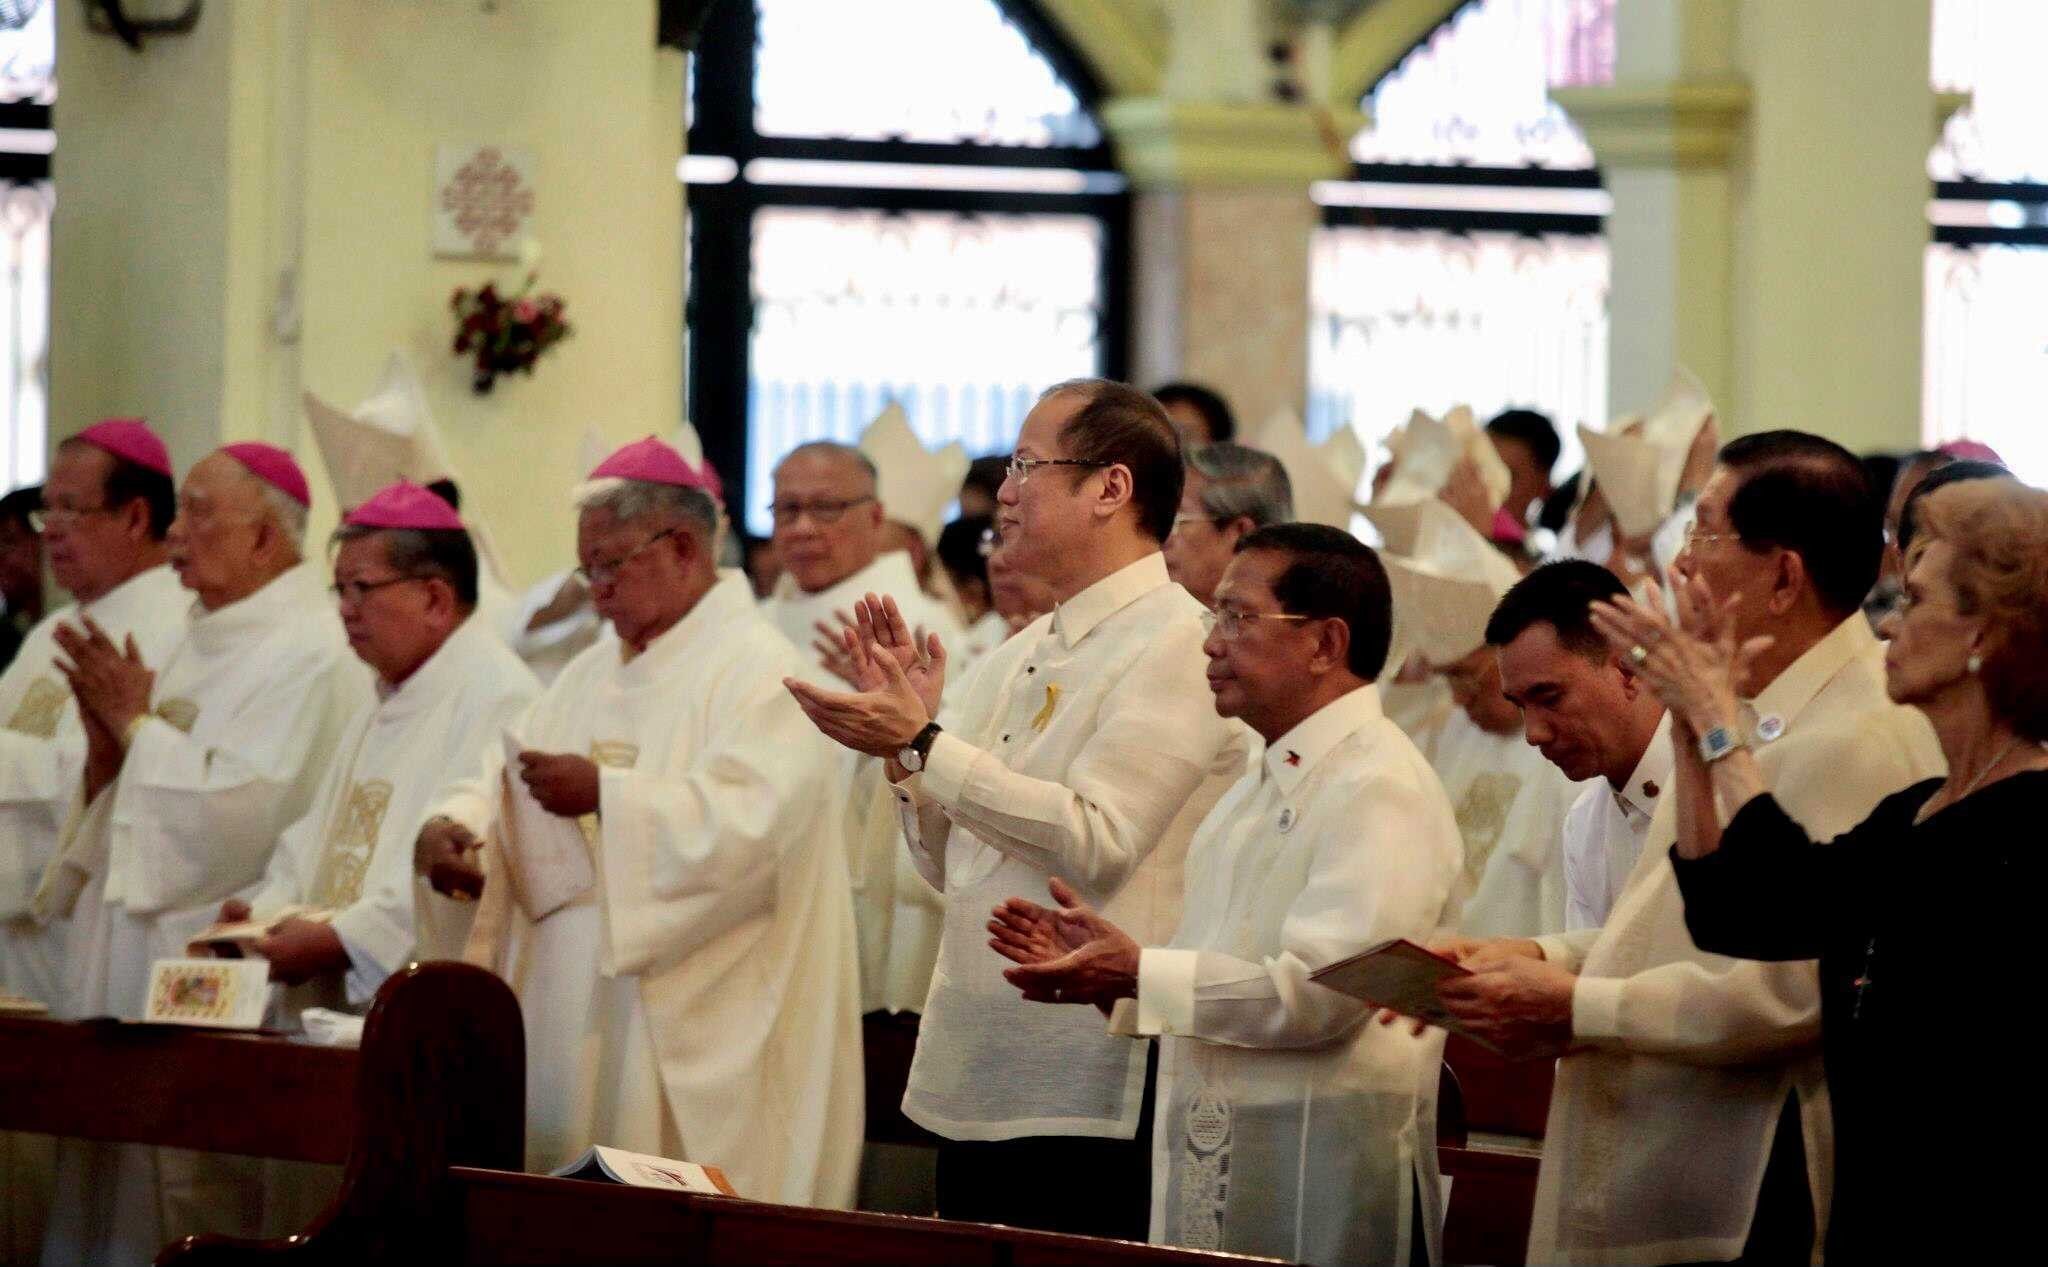 Bishops mourn, remember Aquino for 'deep dedication to democracy'